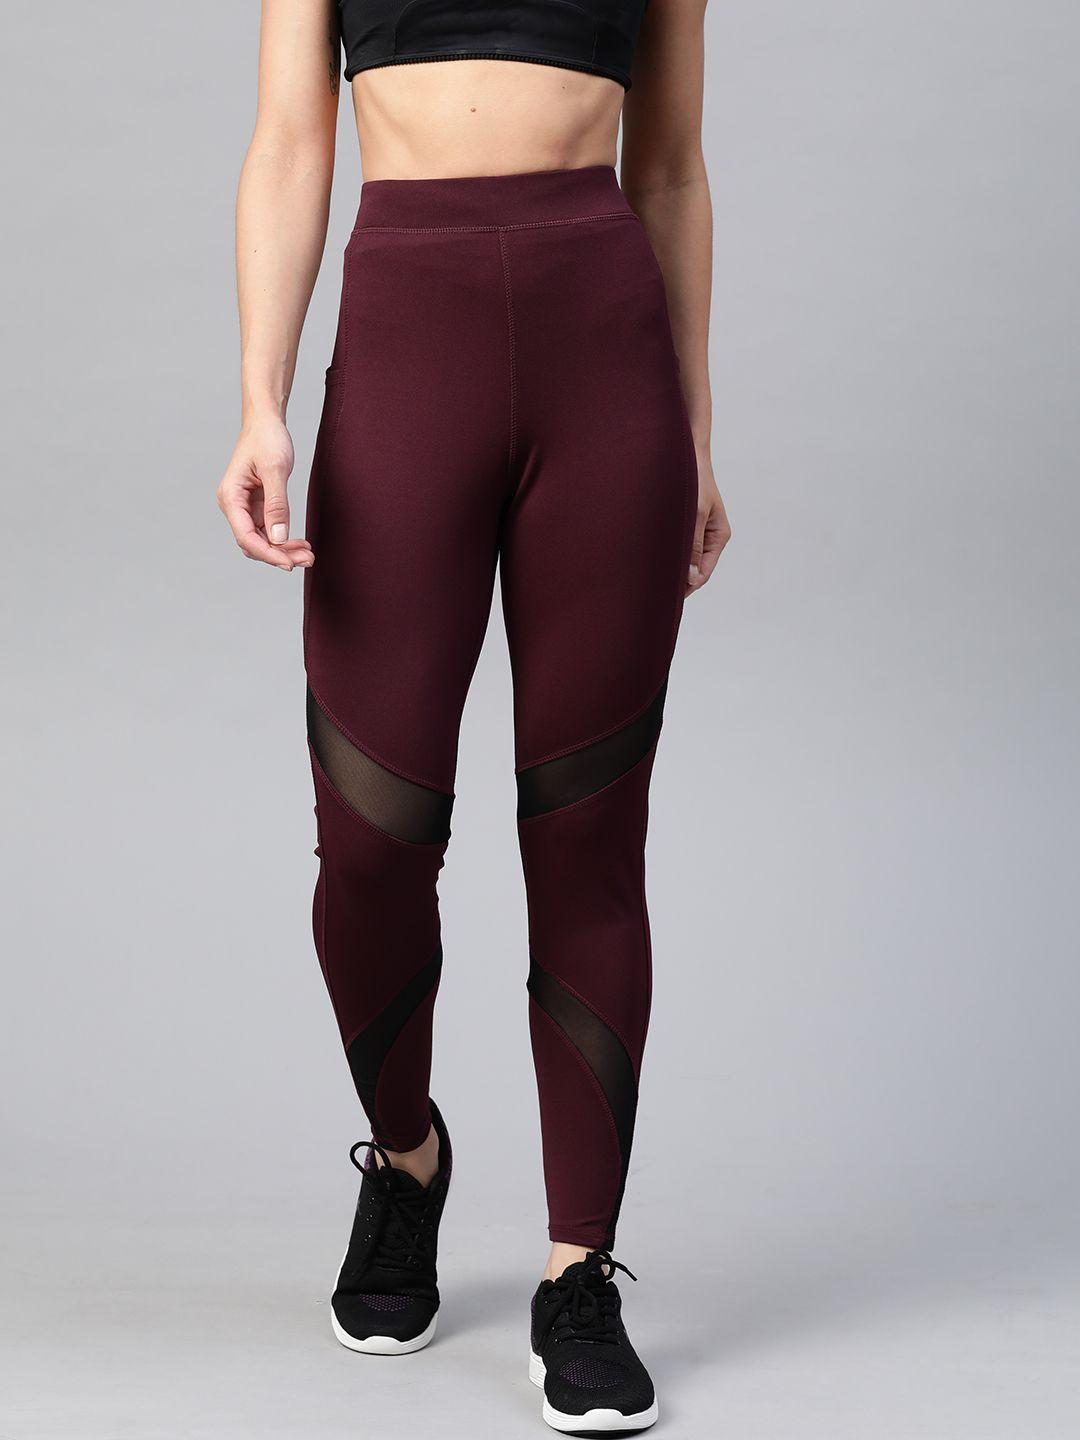 m7 by metronaut women maroon high-rise solid training tights